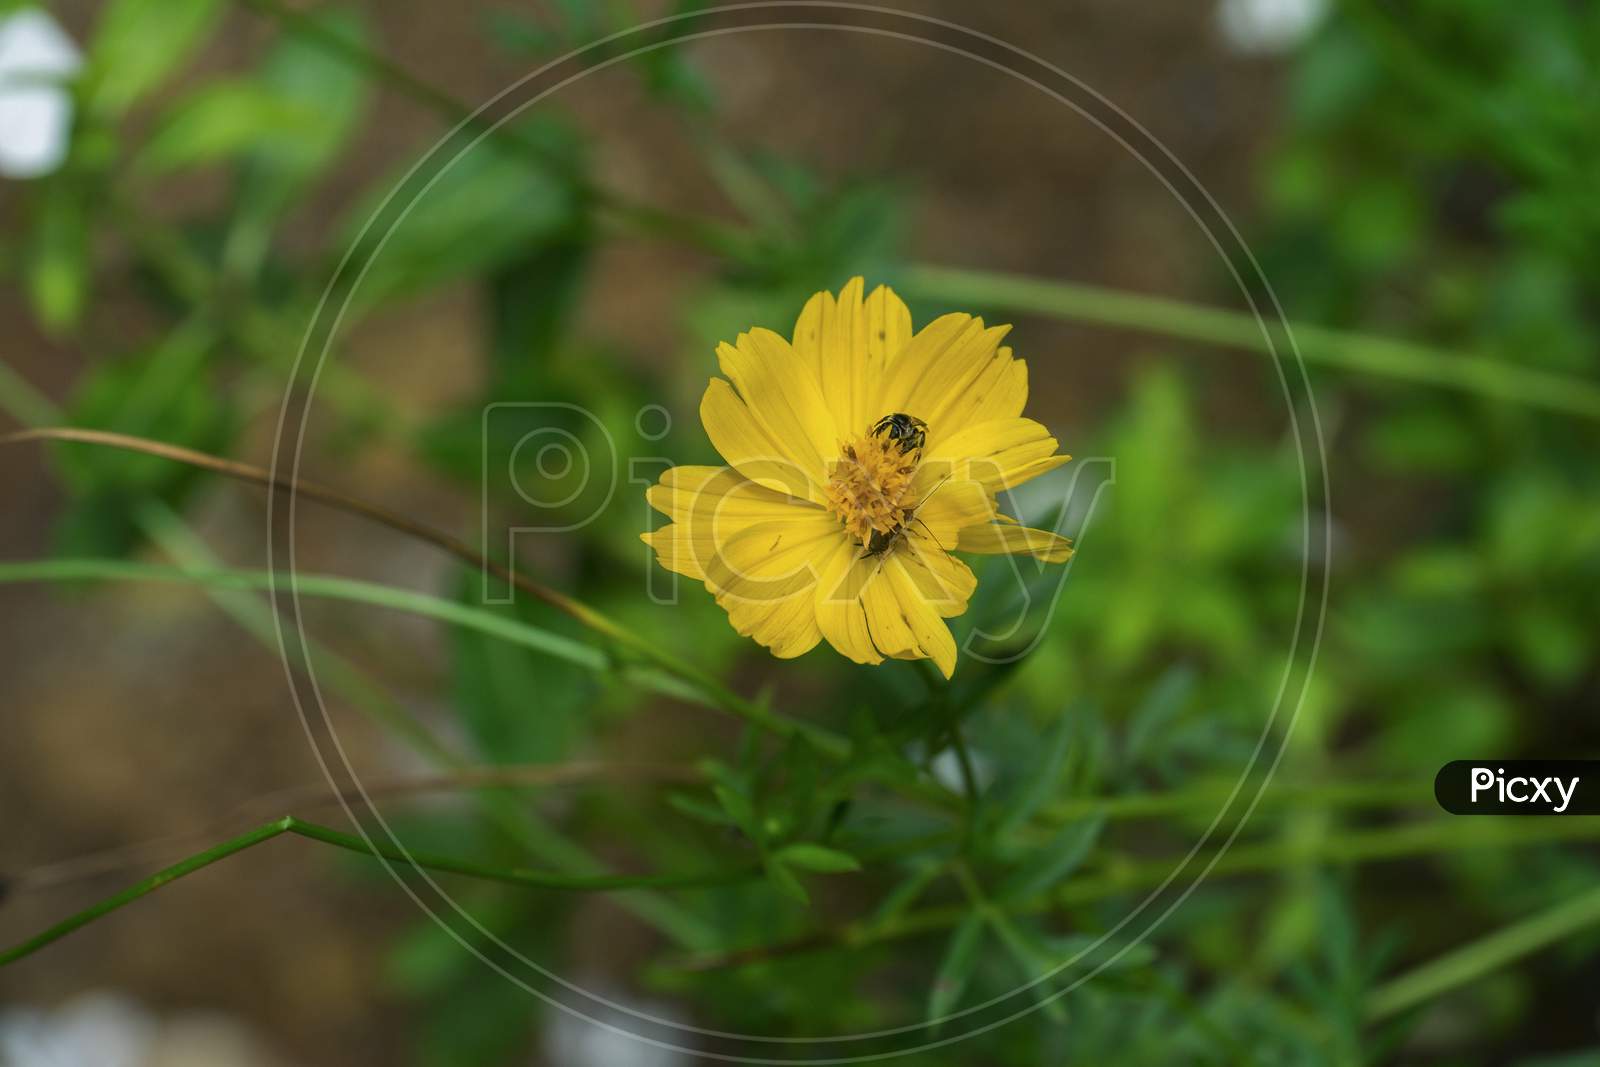 Bee Is Feeding Nectar From Yellow Cosmos Flower.Cosmos Sulphureus Is Also Known As Sulfur Cosmos.